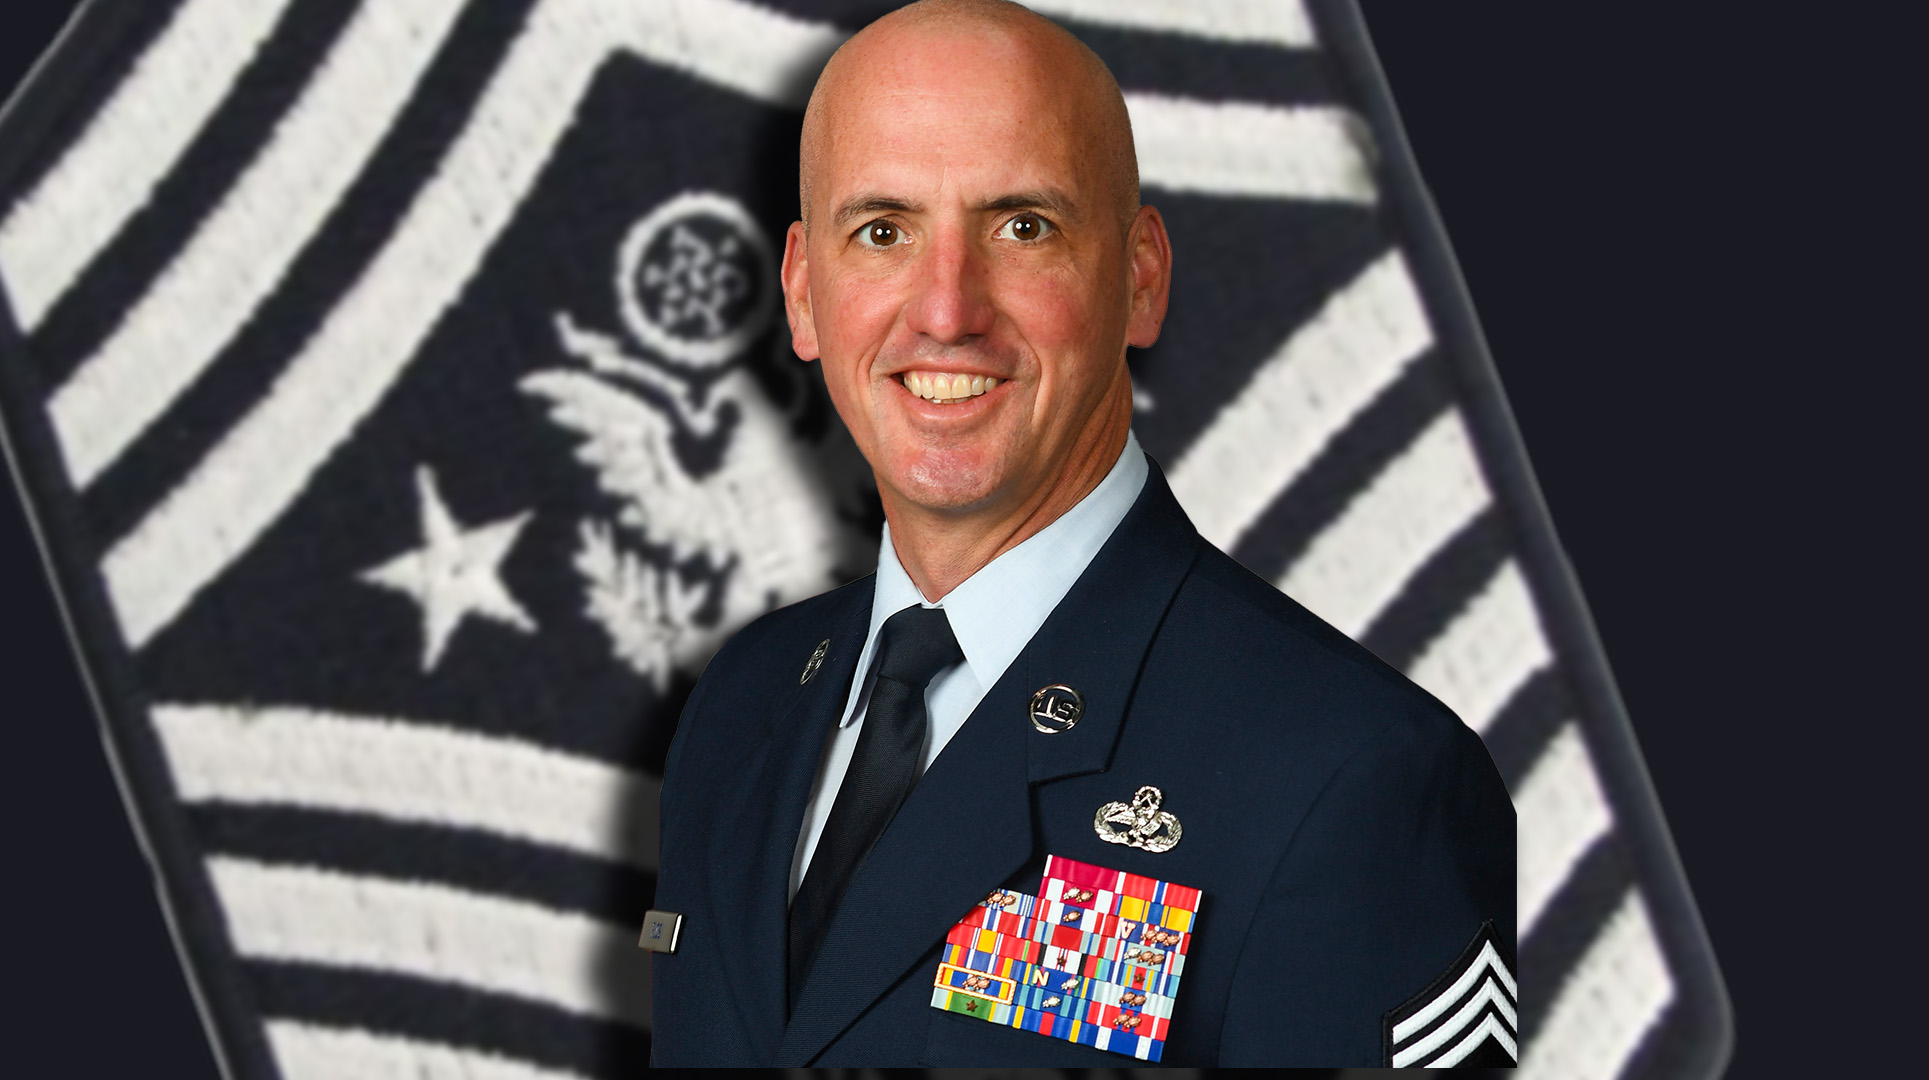 The new Chief Master Sergeant of the Air Force has  nuclear weapons background